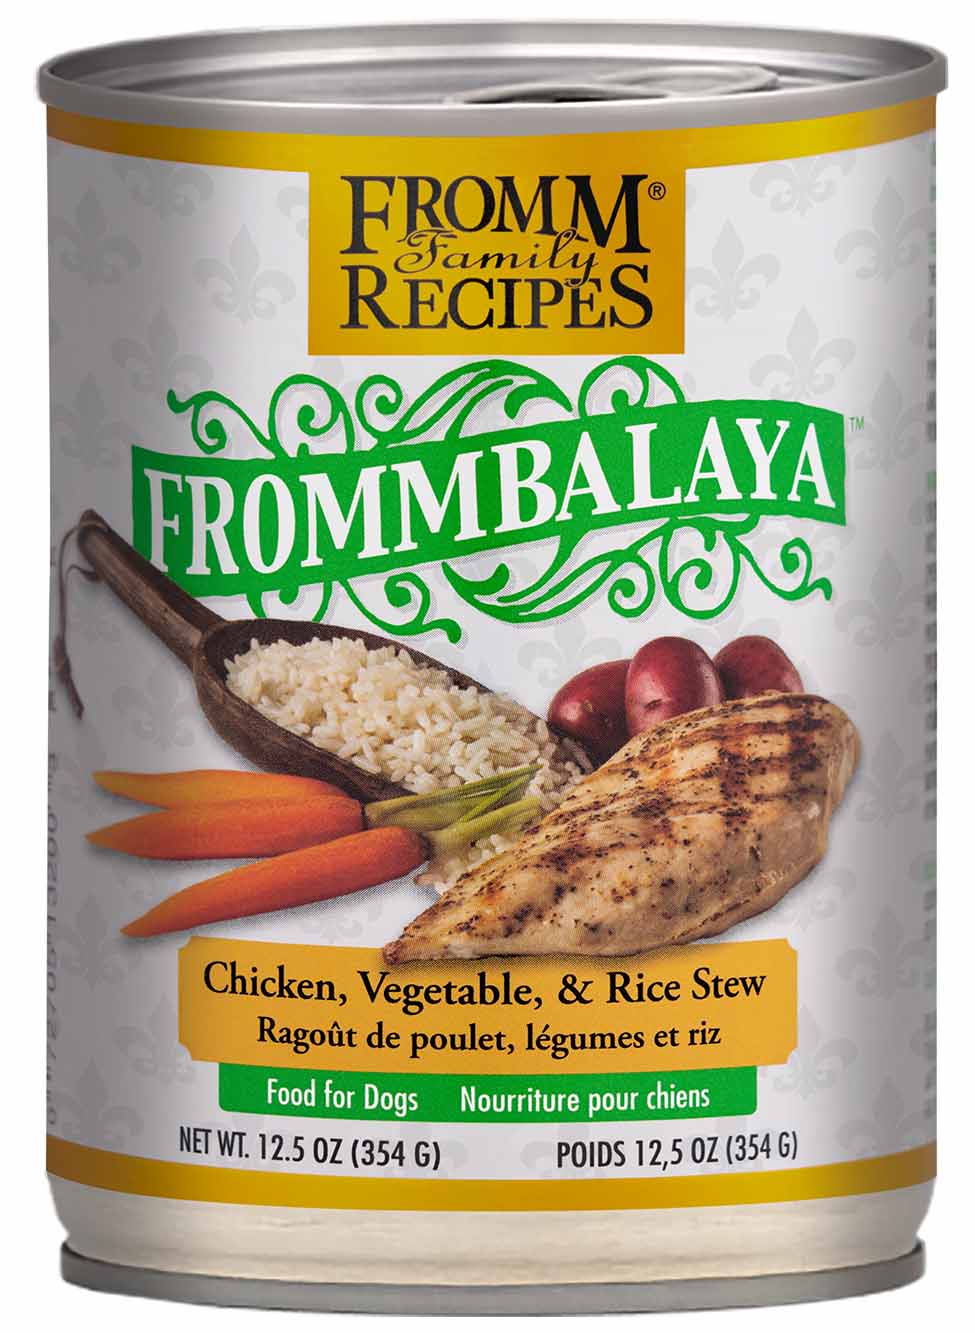 Fromm® Family Recipes Frommbalaya® Chicken, Vegetable & Rice Stew